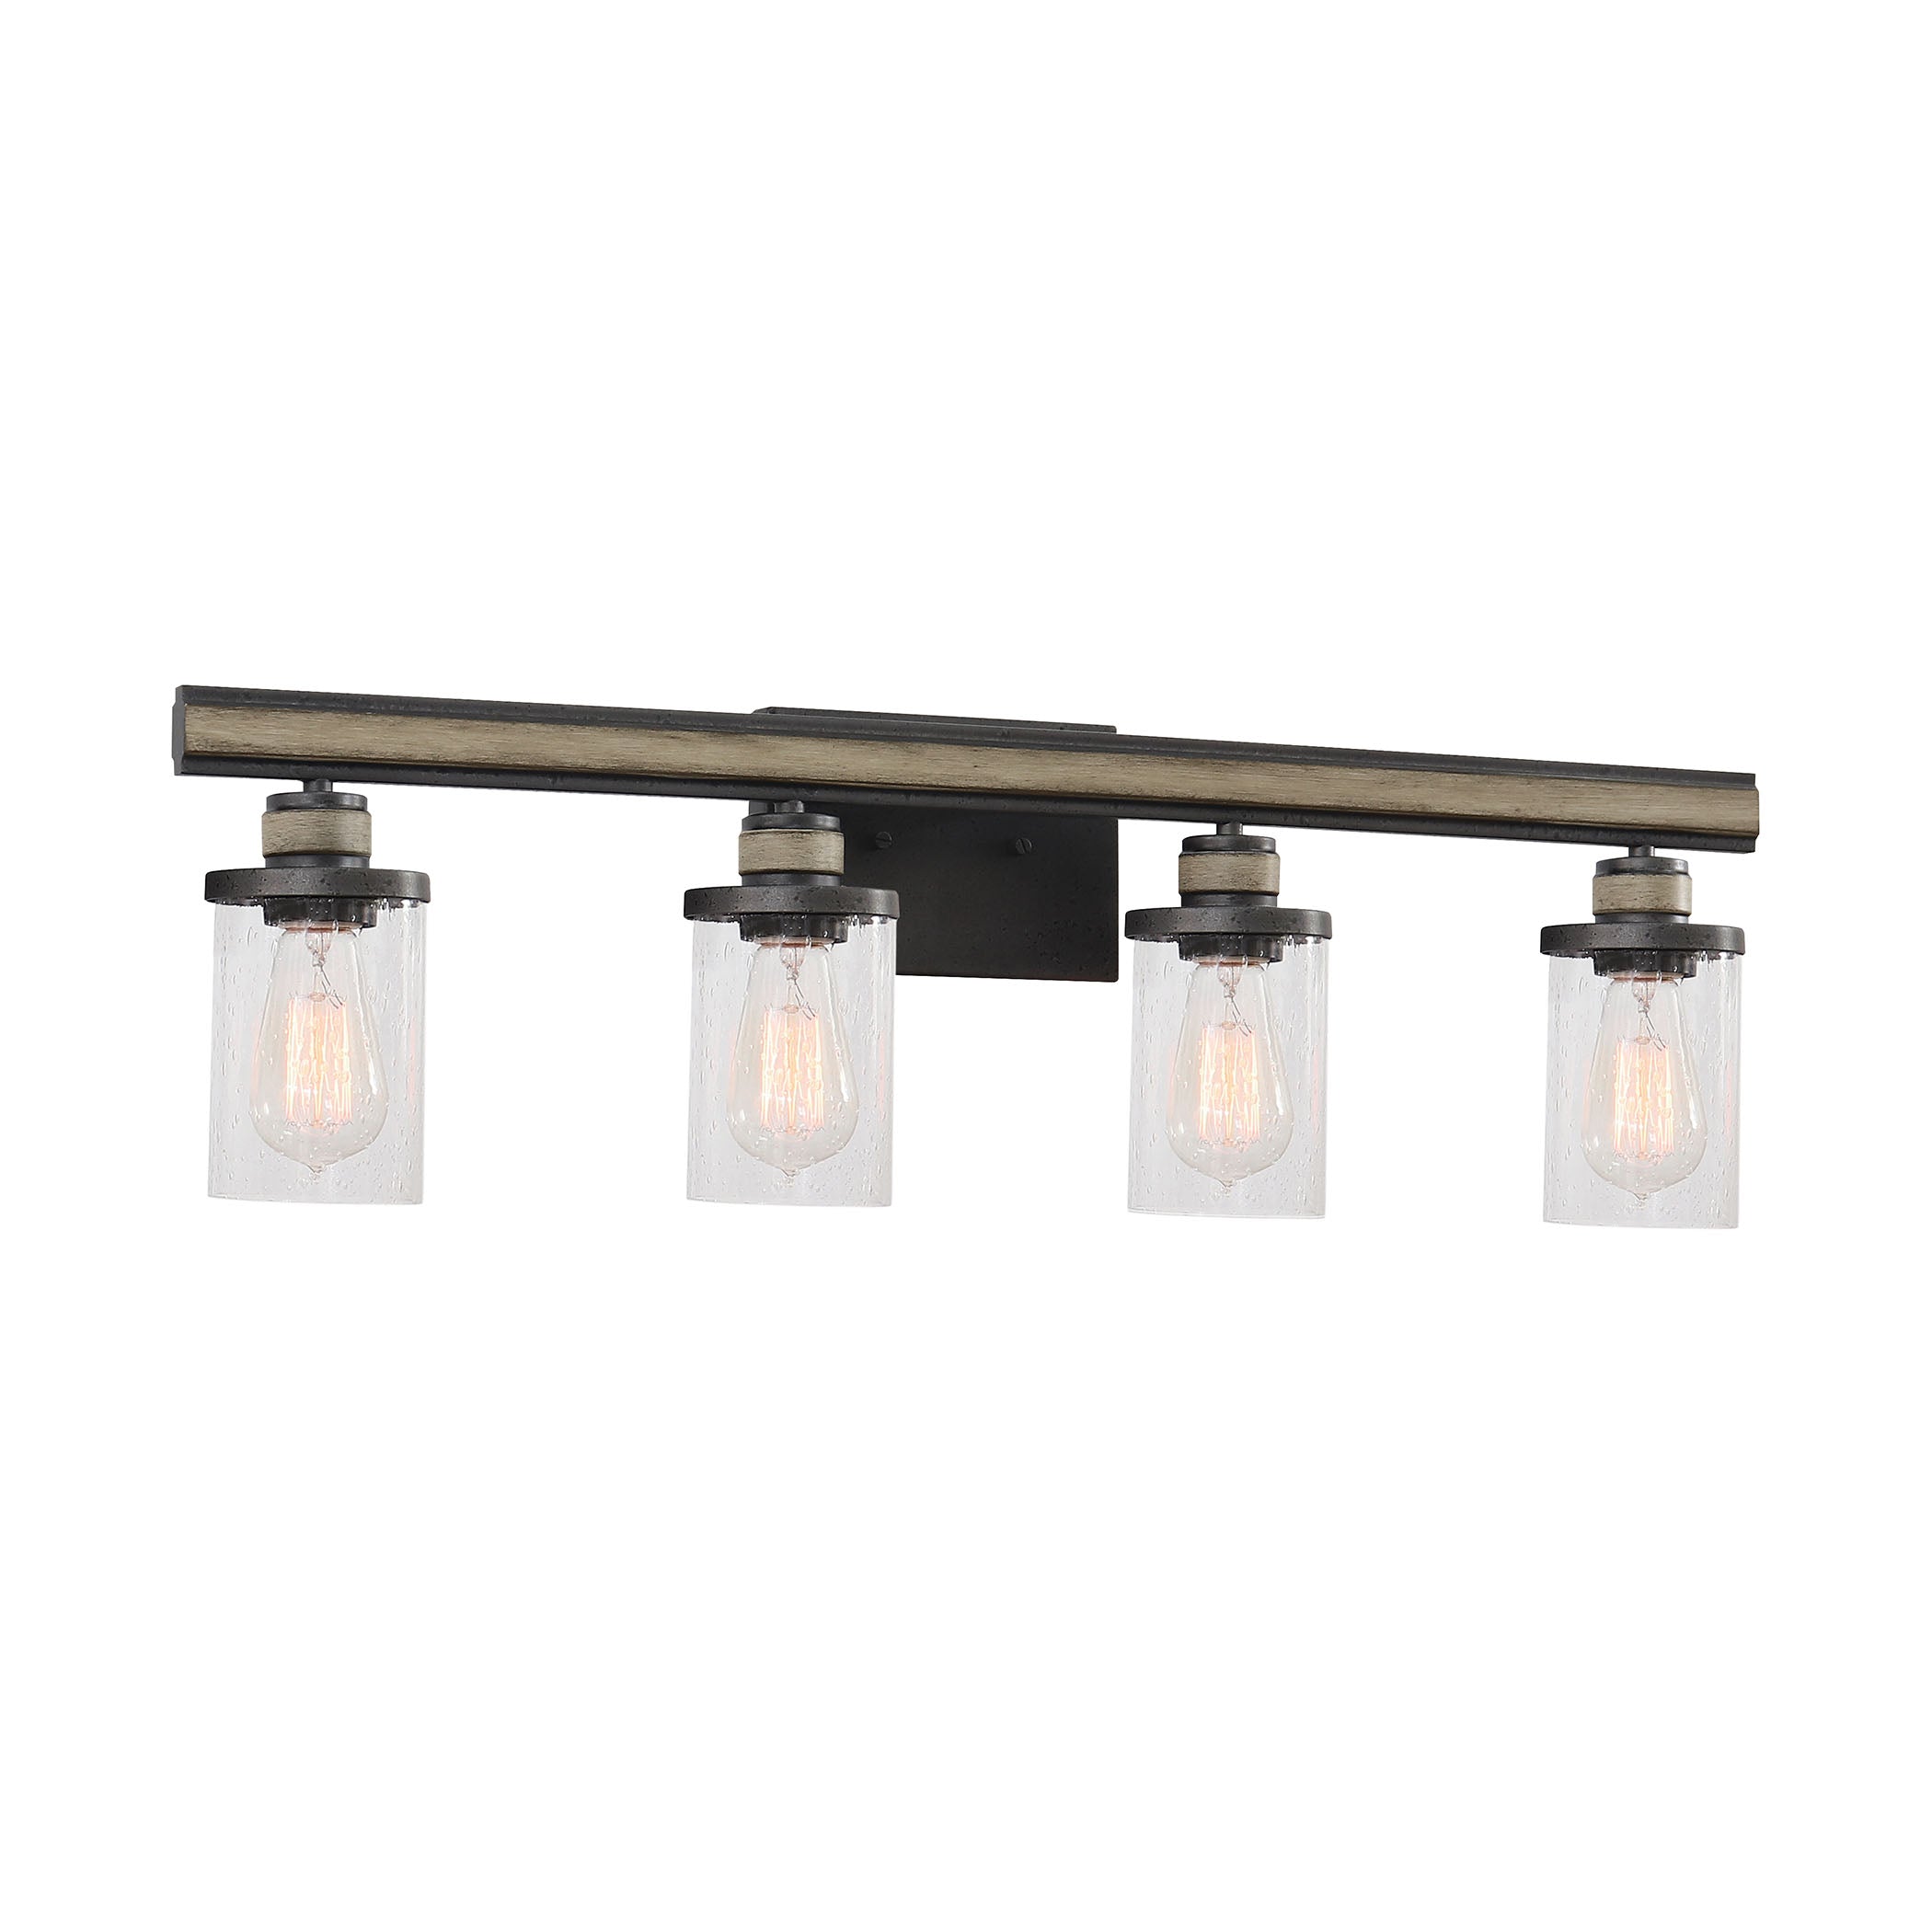 ELK Lighting 89155/4 Beaufort 4-Light Vanity Light in Anvil Iron and Distressed Antique Graywood with Seedy Glass